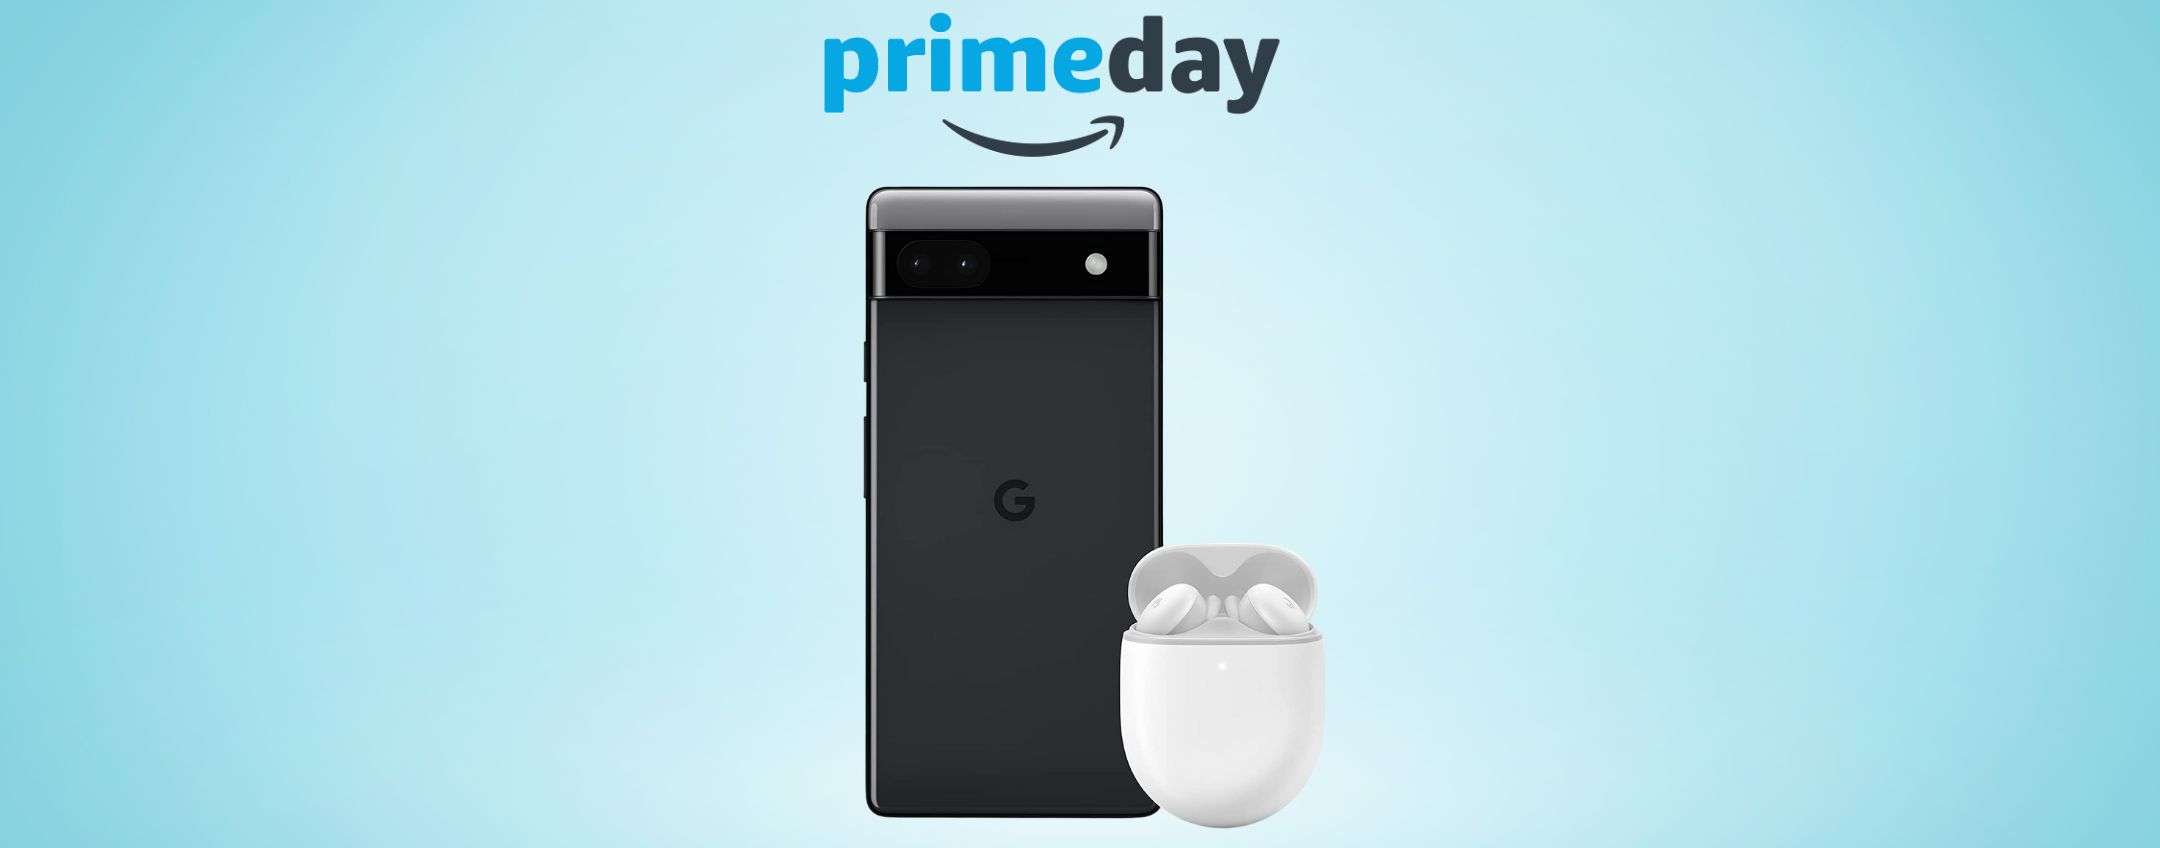 Google Pixel 6a with free Pixel Buds: Prime Day offer